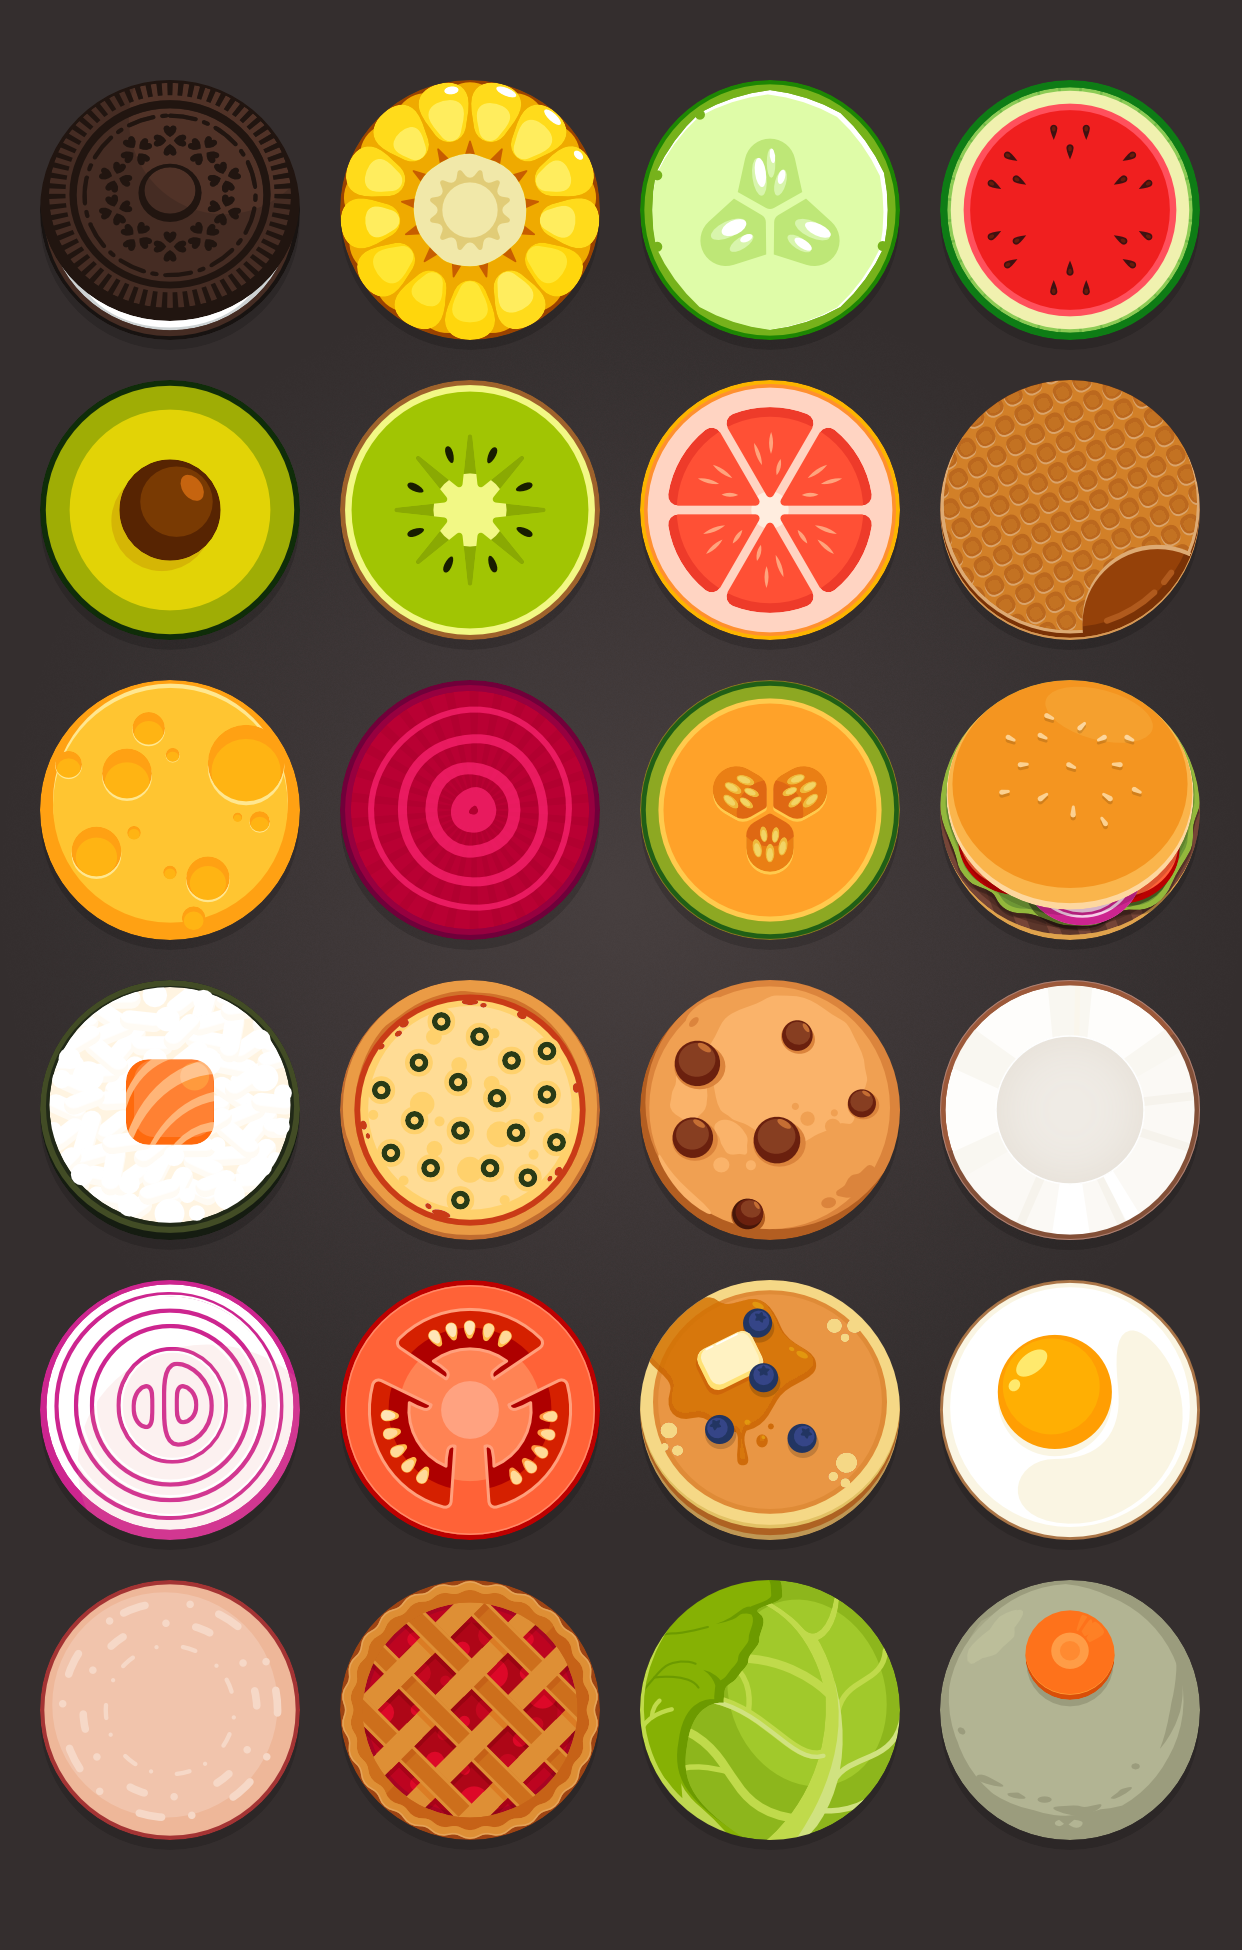 Various Lucky Pie assets, all are food inspired and shaped as a perfect circle